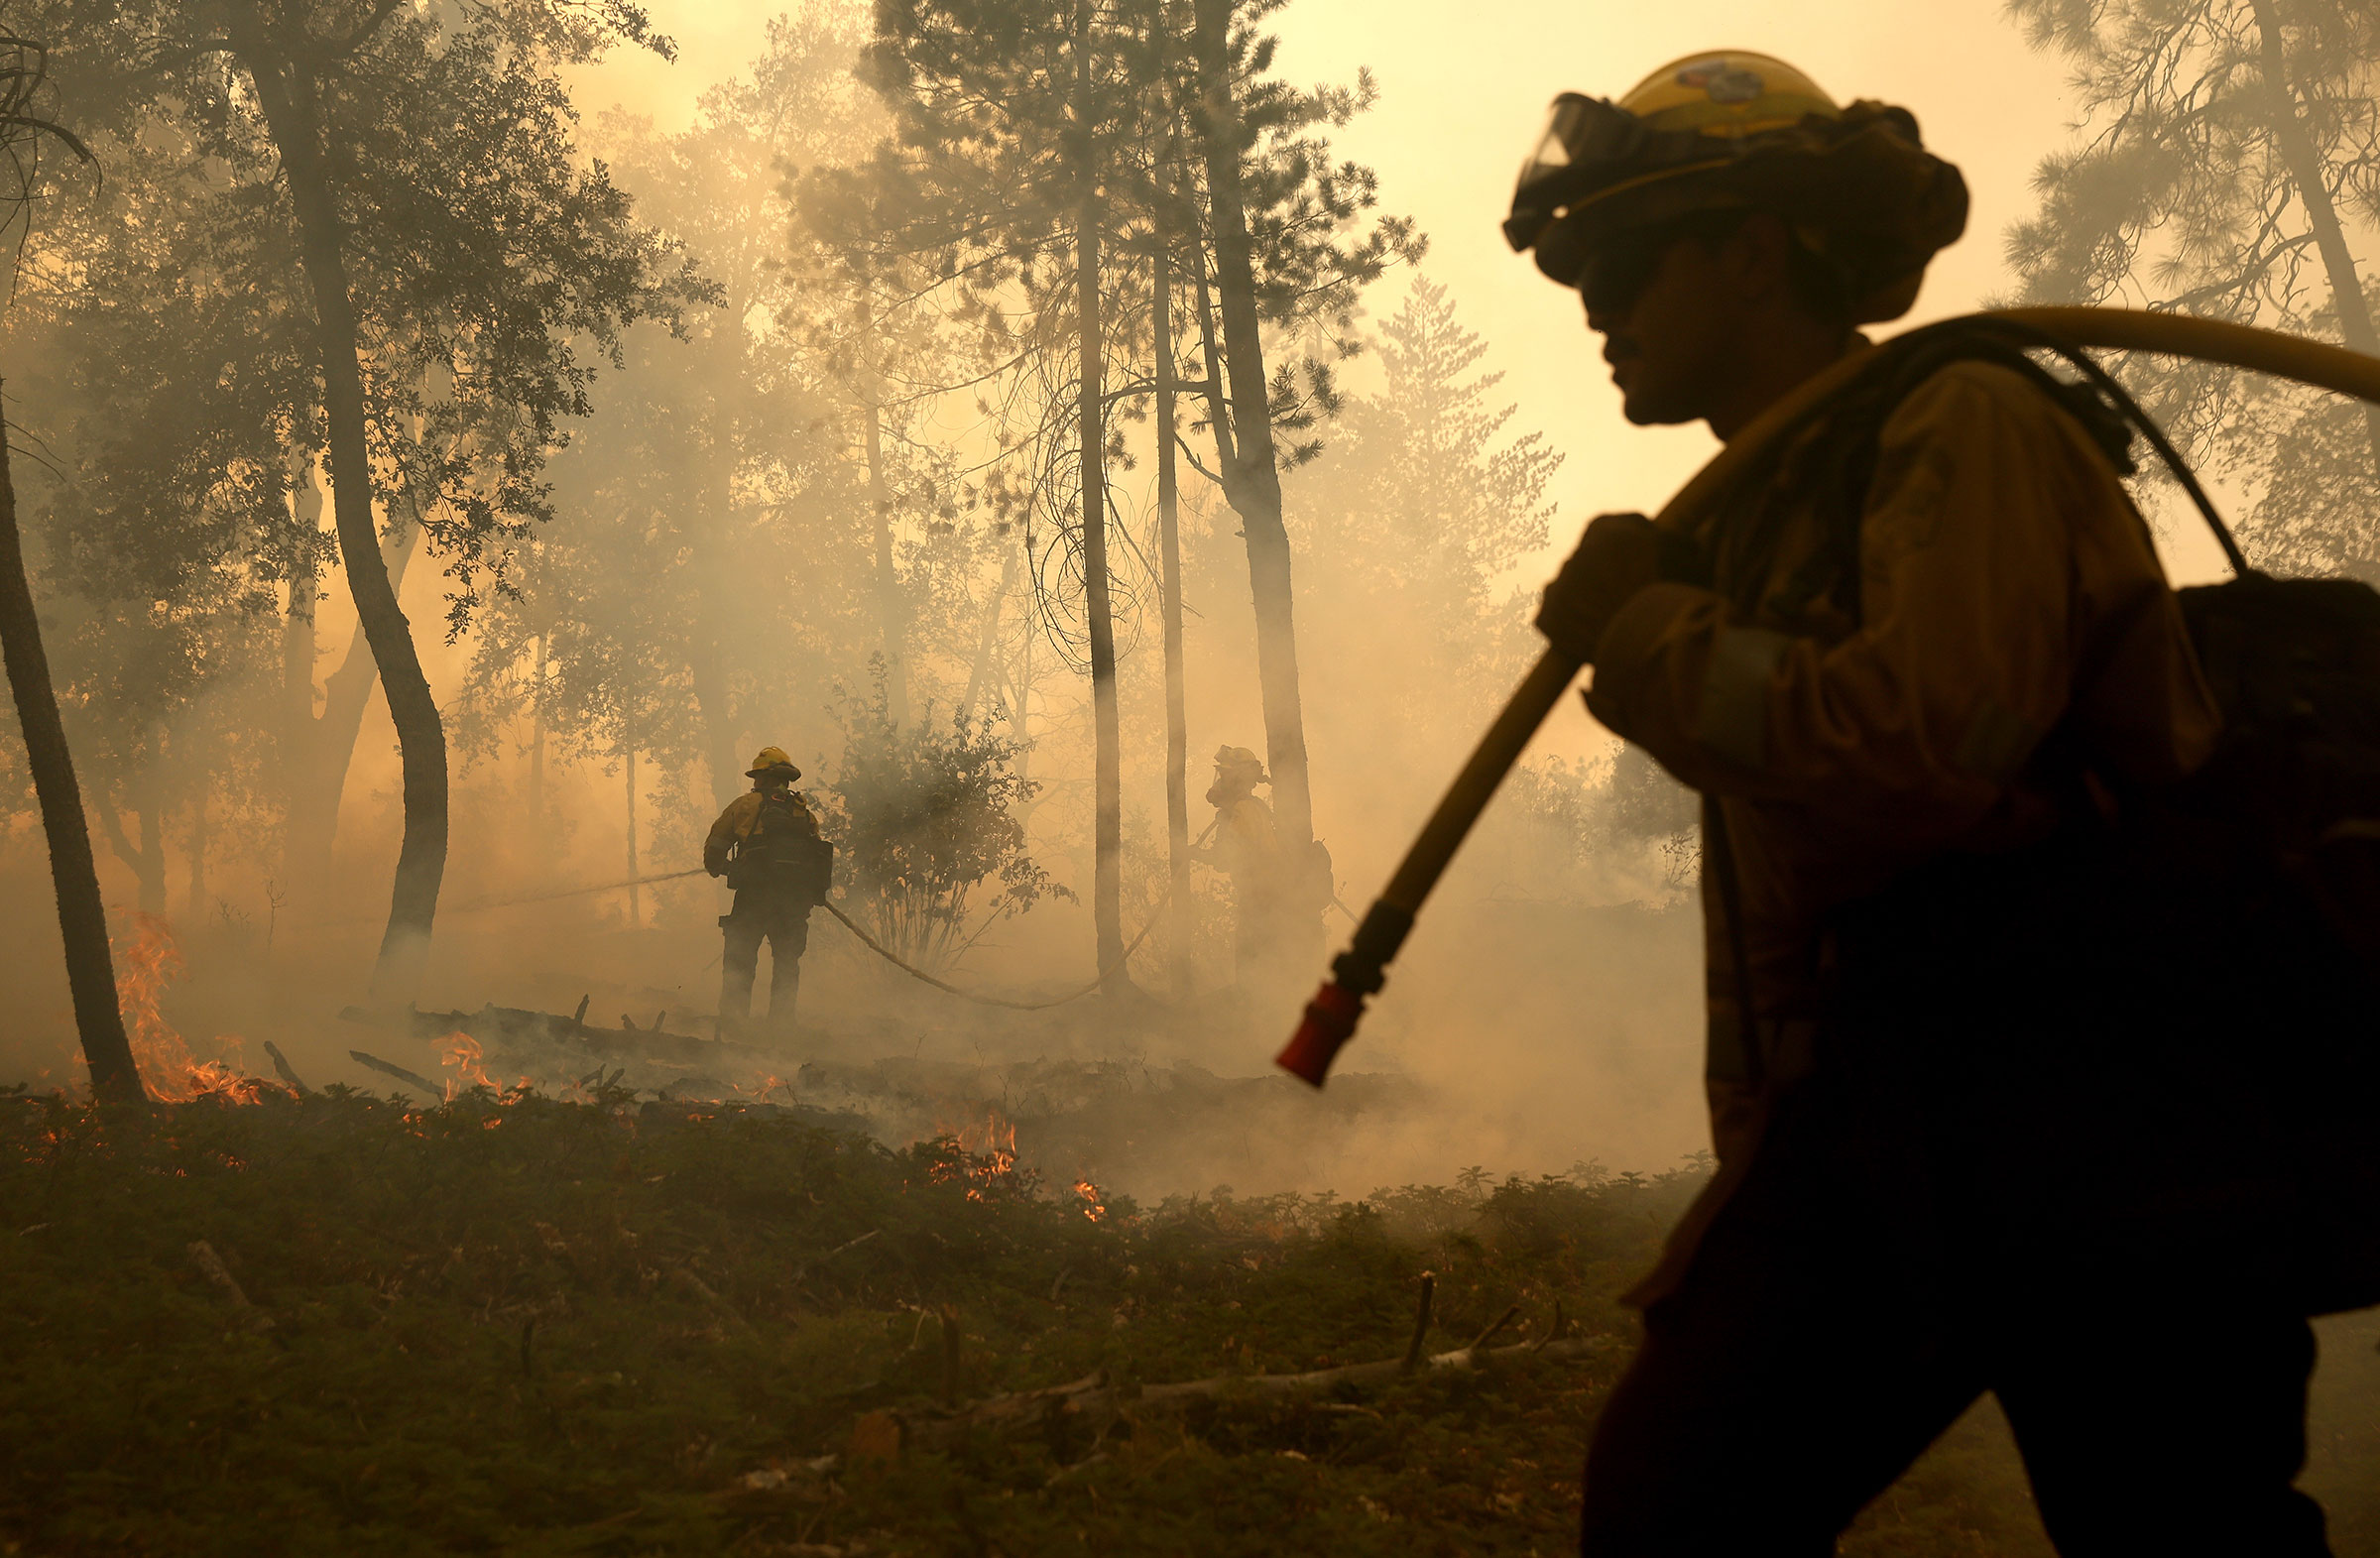 CAL FIRE firefighters monitor a burn operation as they battle the Oak Fire near Jerseydale, Calif., on July 24. (Justin Sullivan—Getty Images)